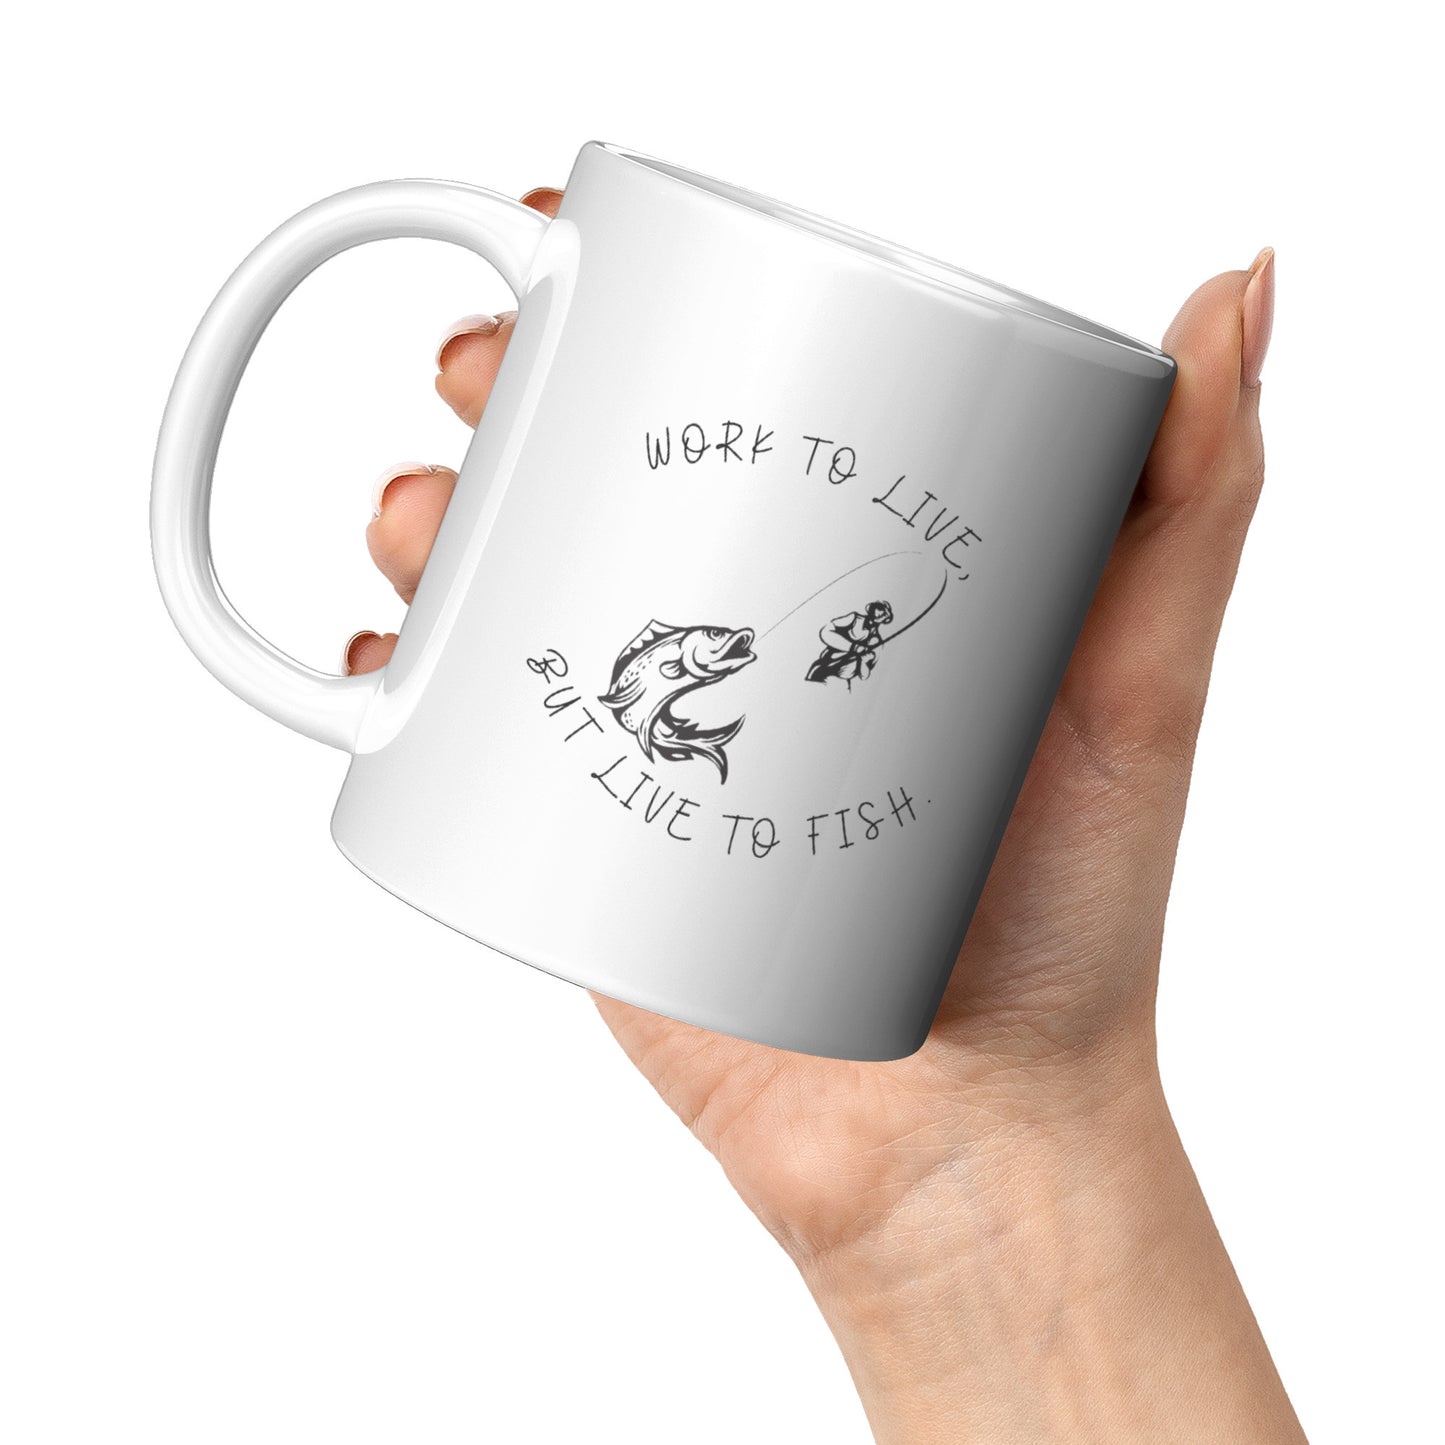 "Live To Fish" Mug For The Outdoor Enthusiast